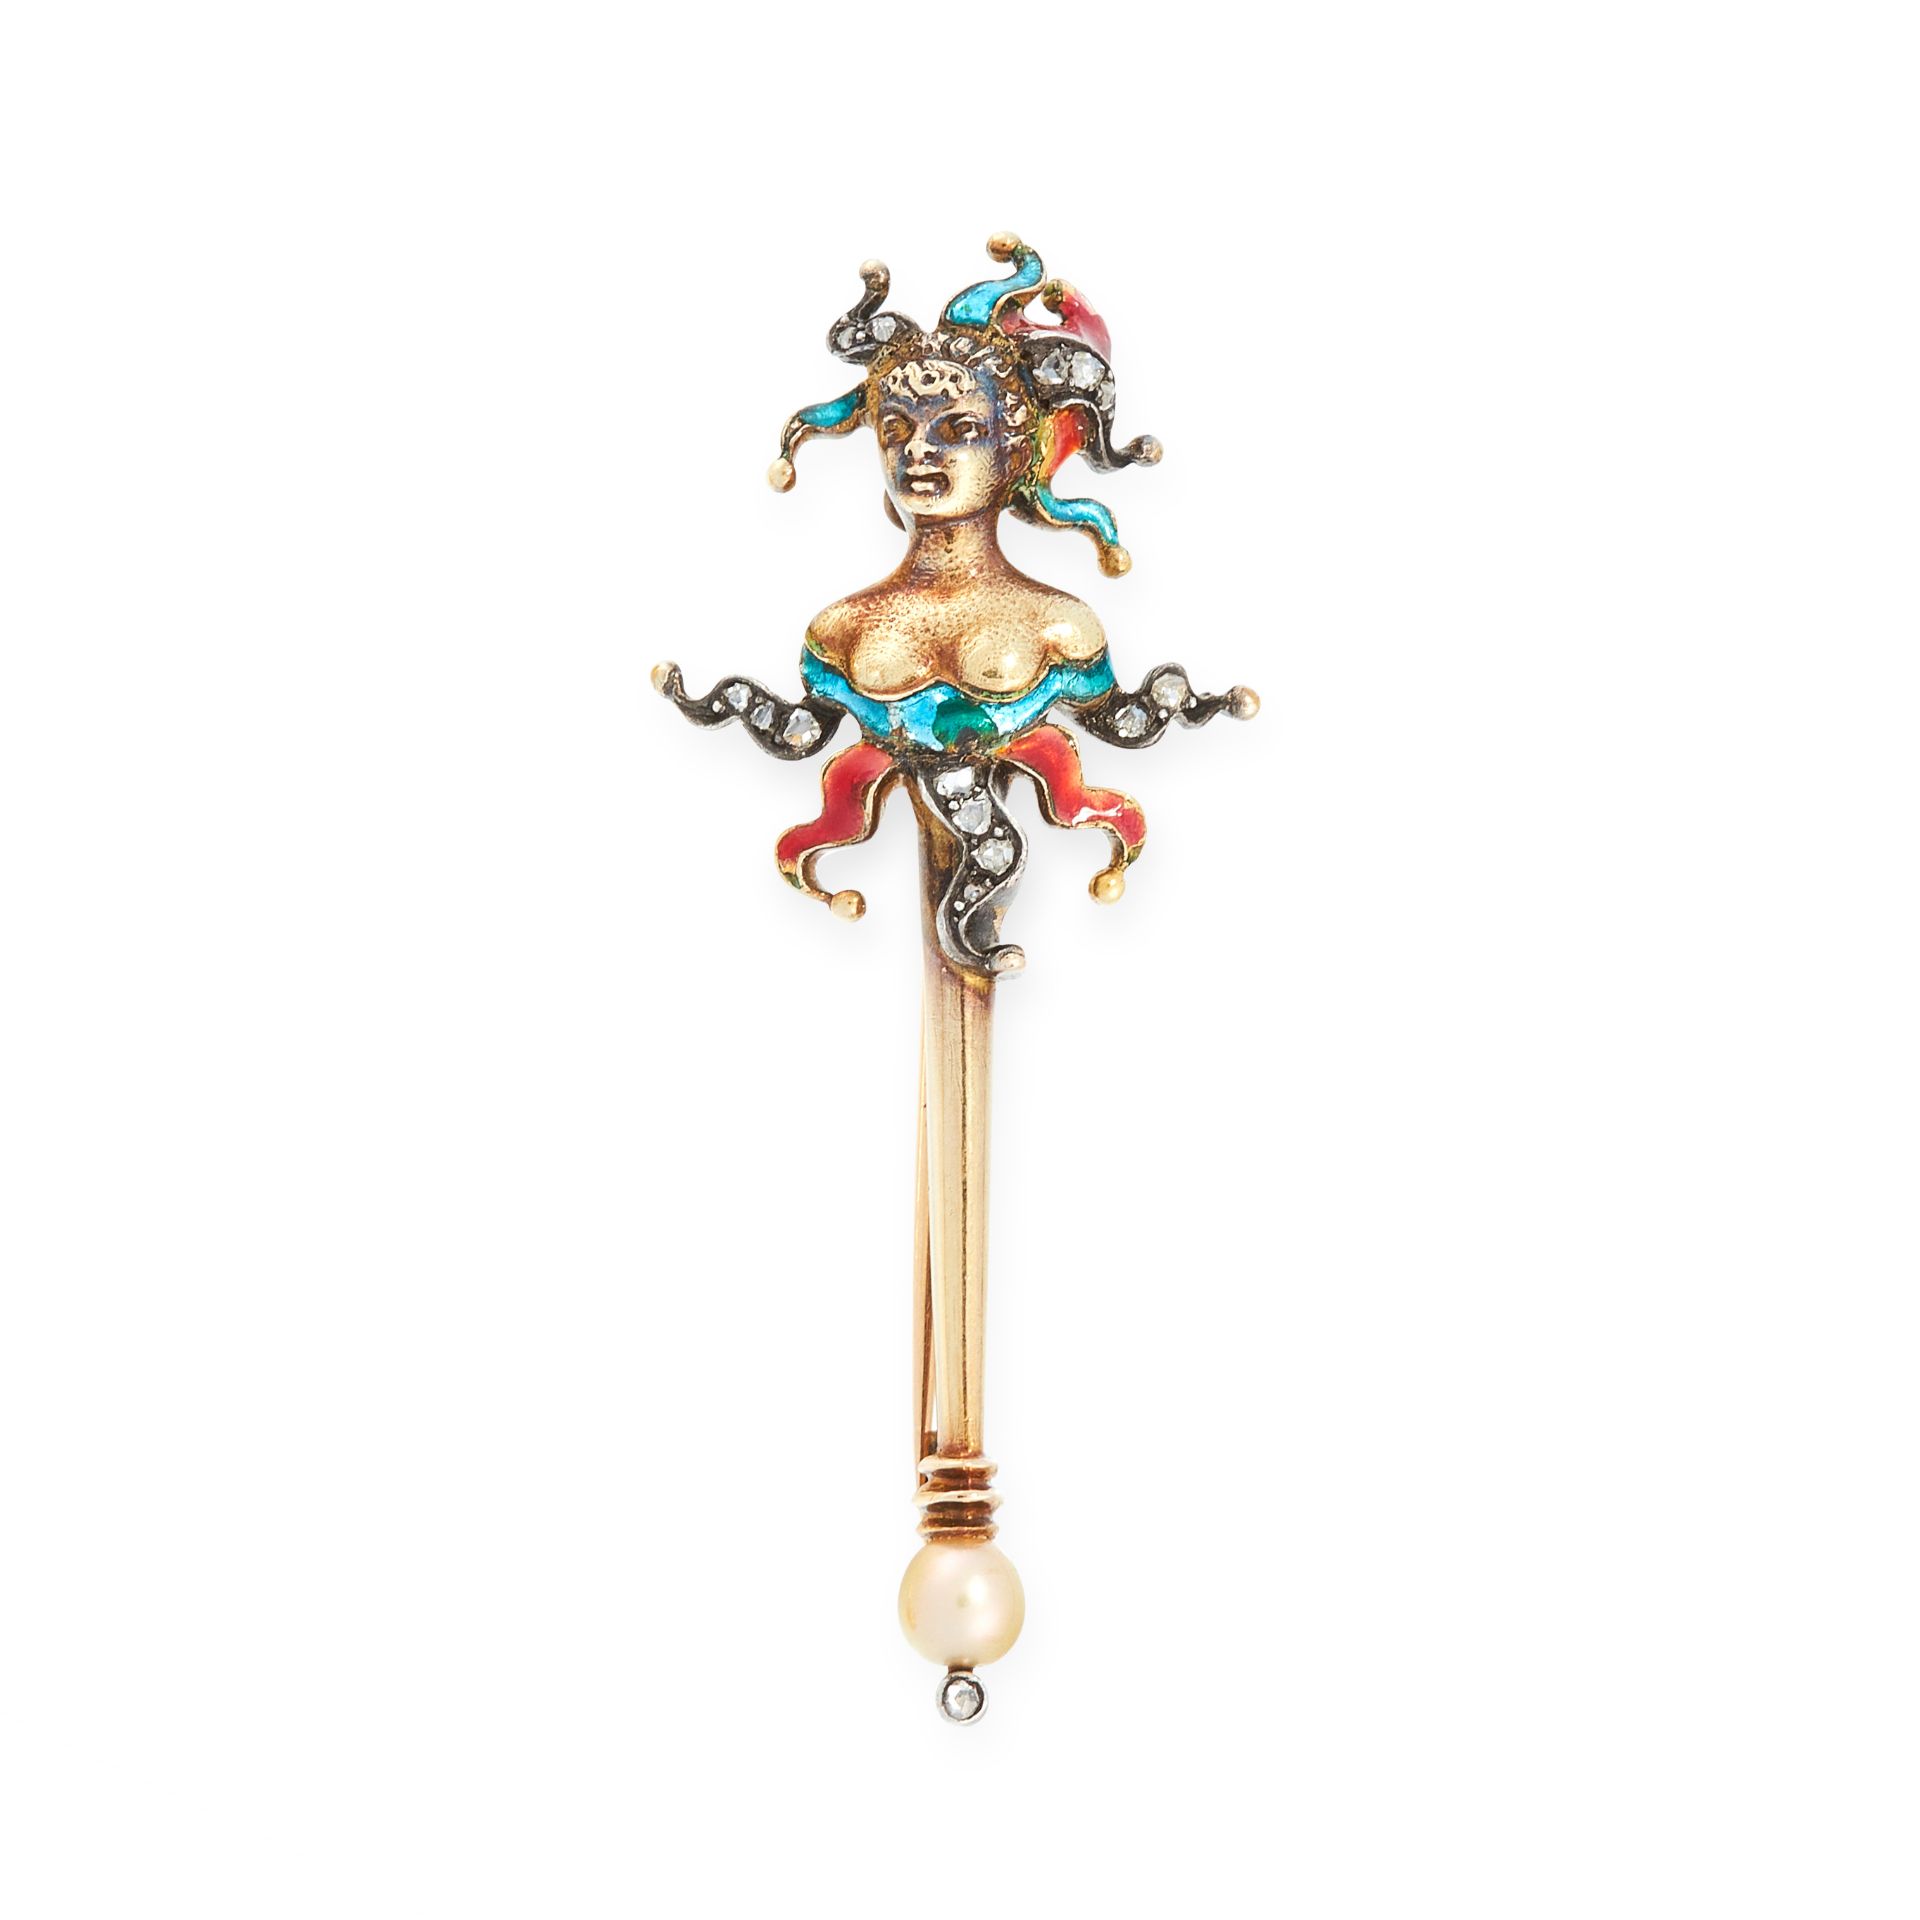 AN ANTIQUE DIAMOND, ENAMEL AND PEARL MAROTTE BROOCH in 18ct yellow gold, the marotte's head jewelled